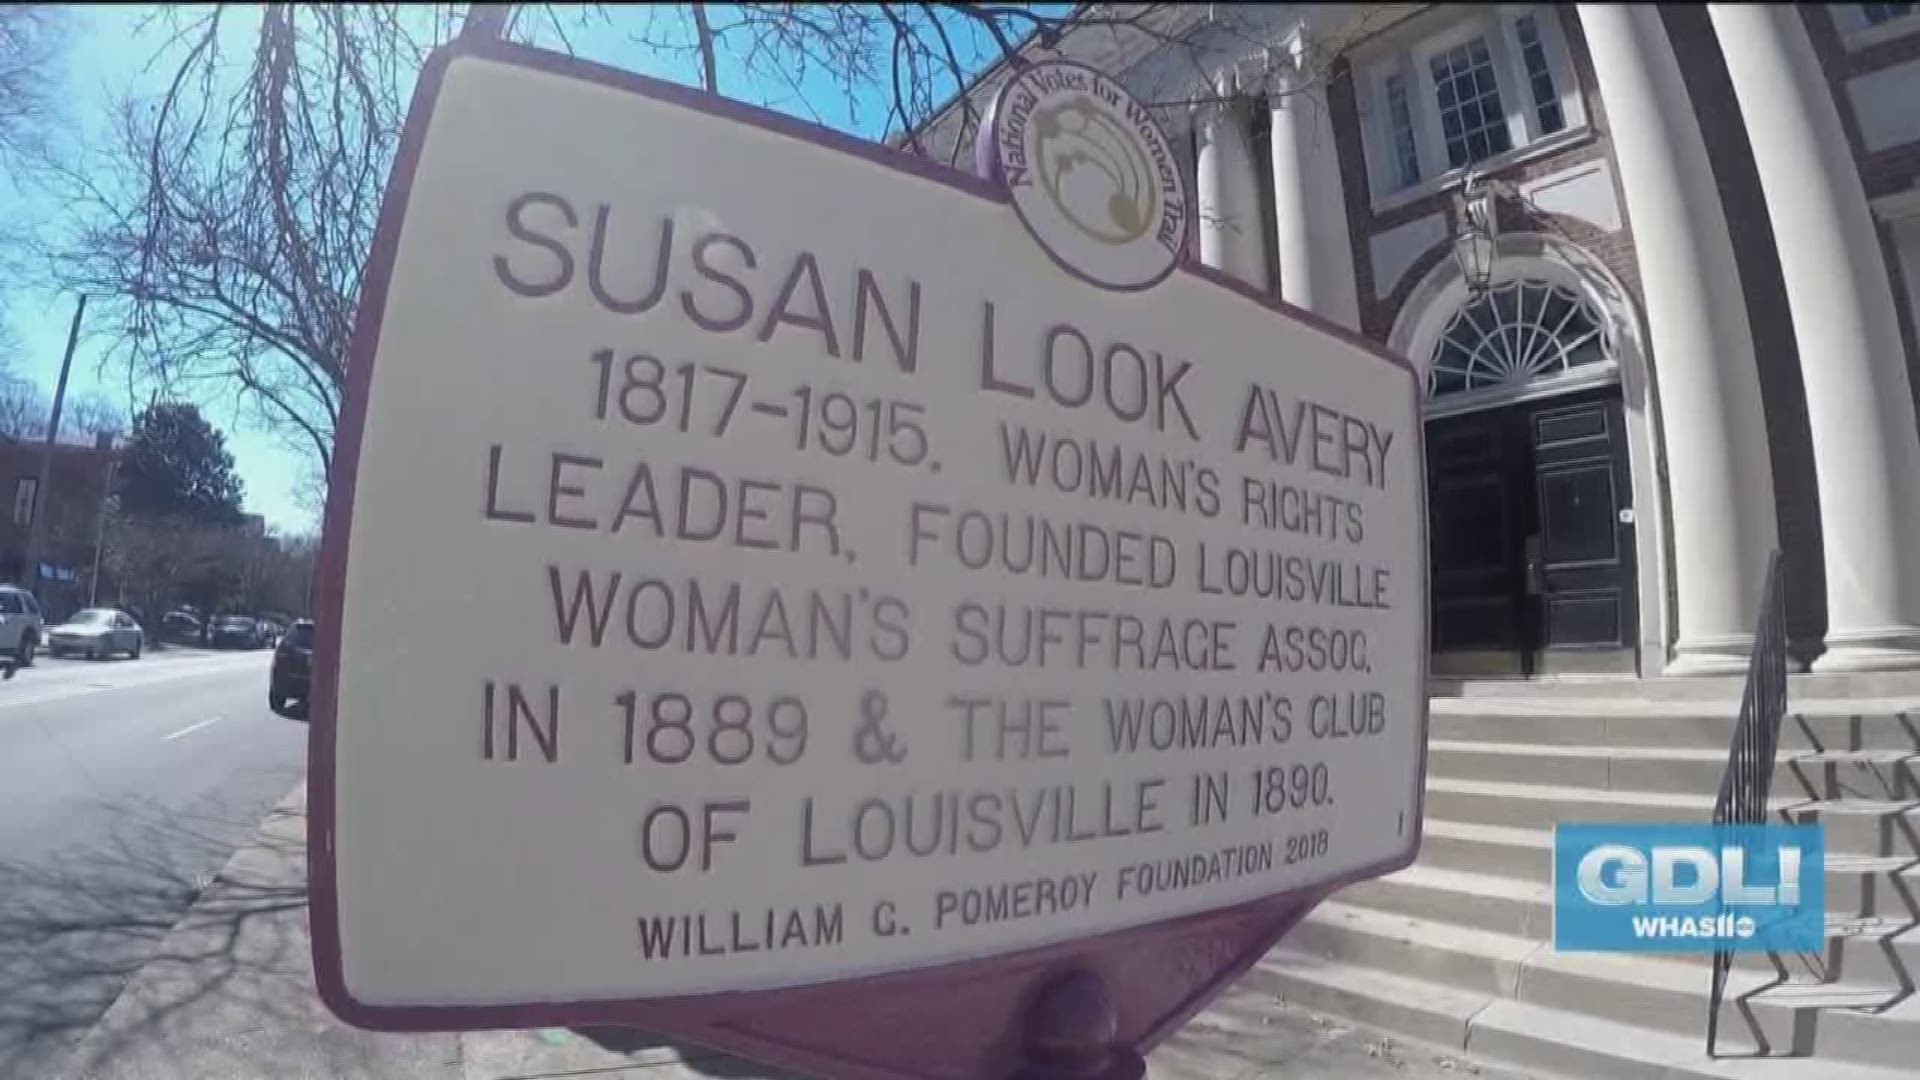 Susan Look Avery was a suffragette who started the Woman's Club of Louisville and helped women win the right to vote. She was honored with a marker that is the first of 250 that will go up across the country.